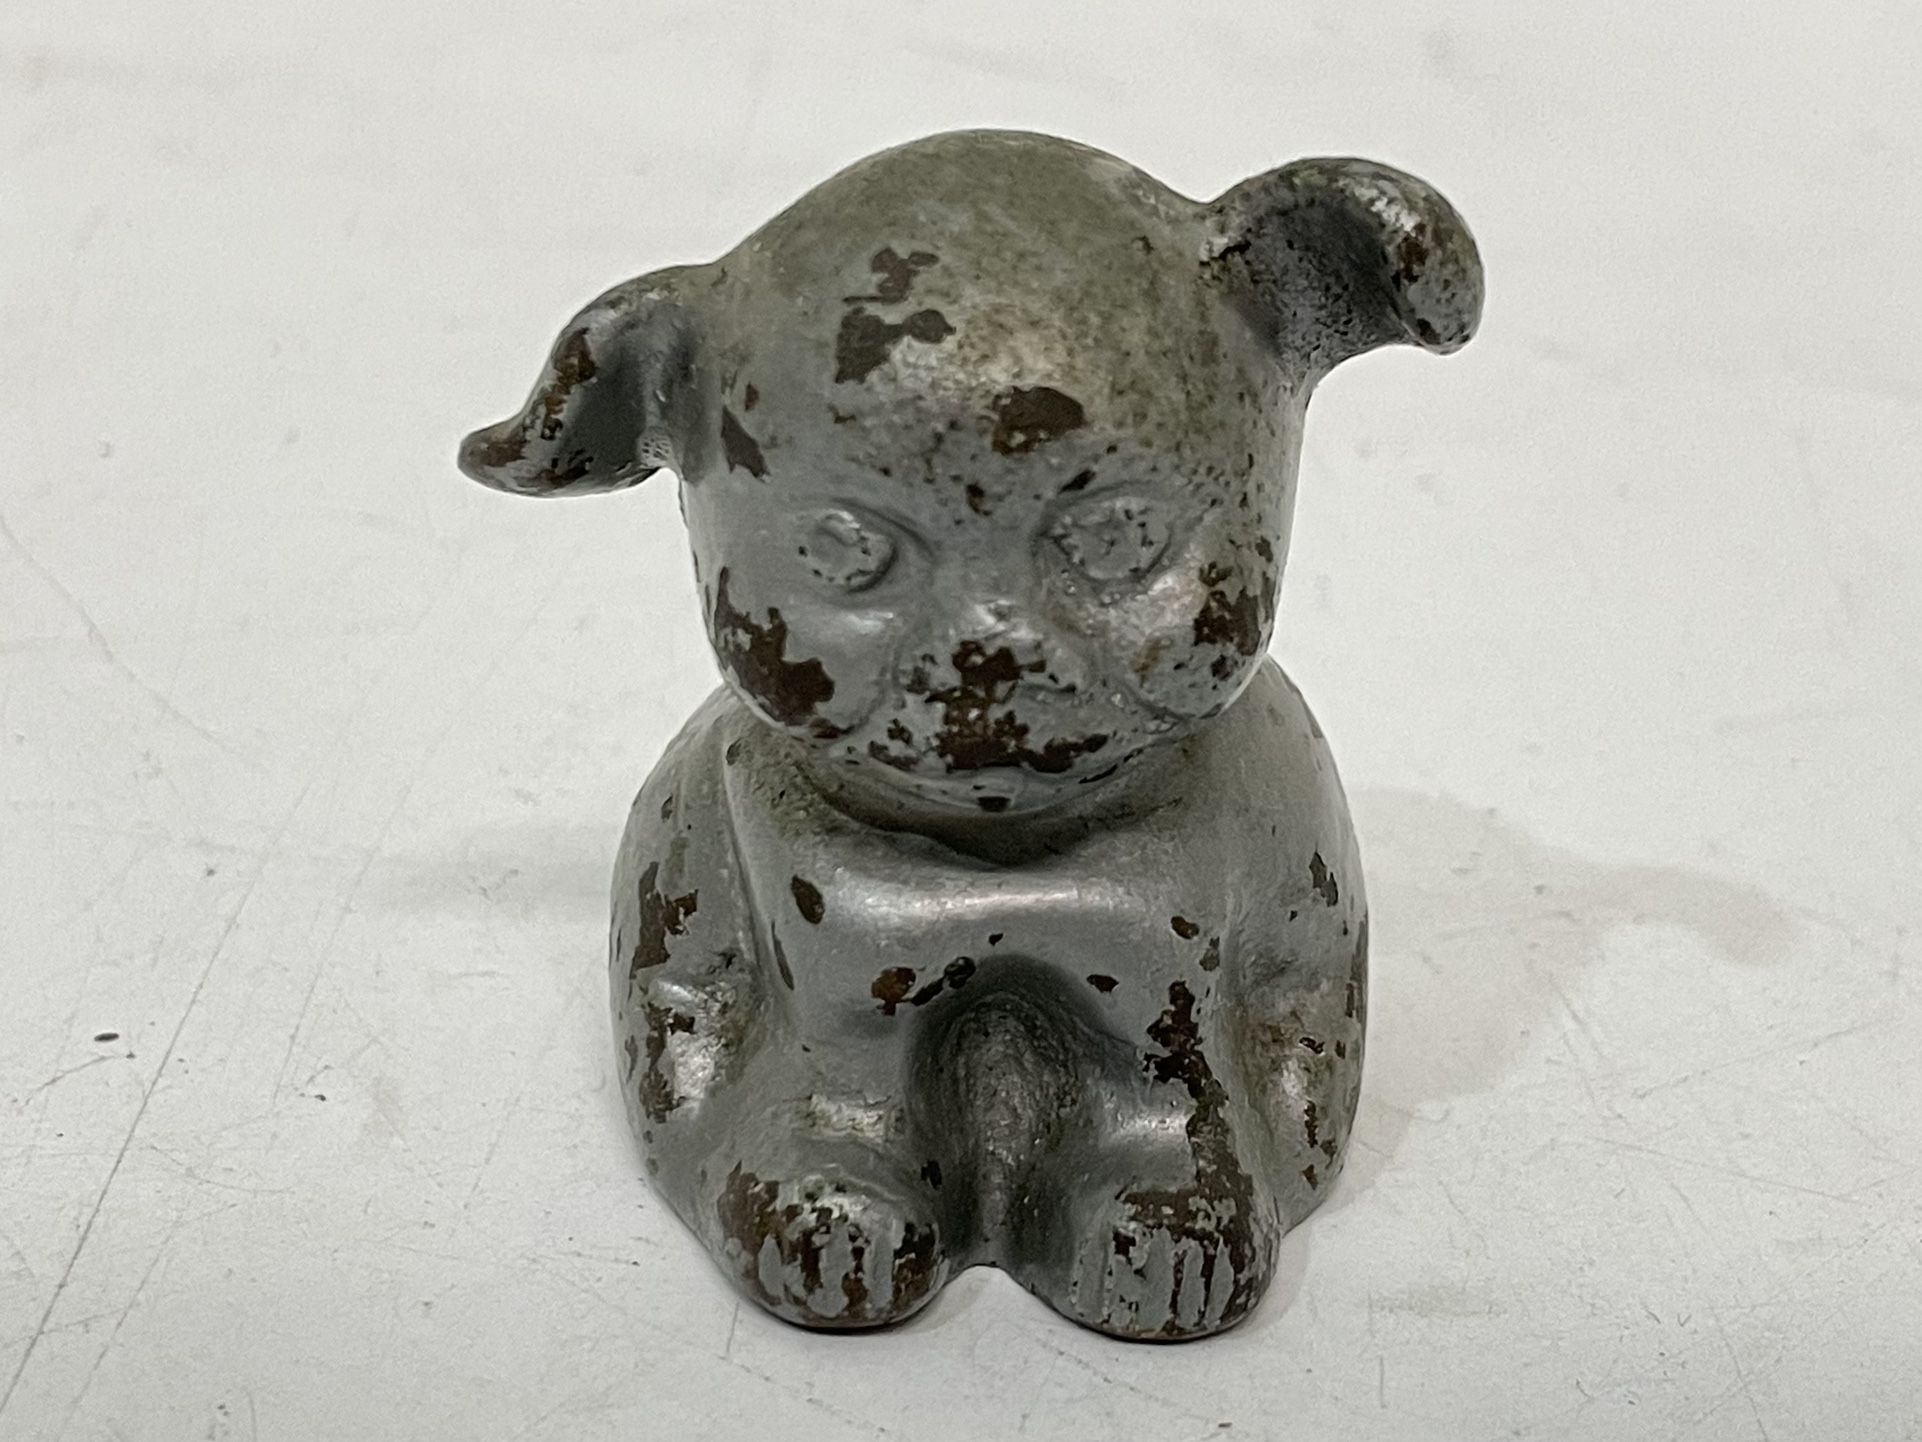 Vintage Cast Iron Advertising Pup Dog Bucki Carbons Ribbons Paperweight Figurine